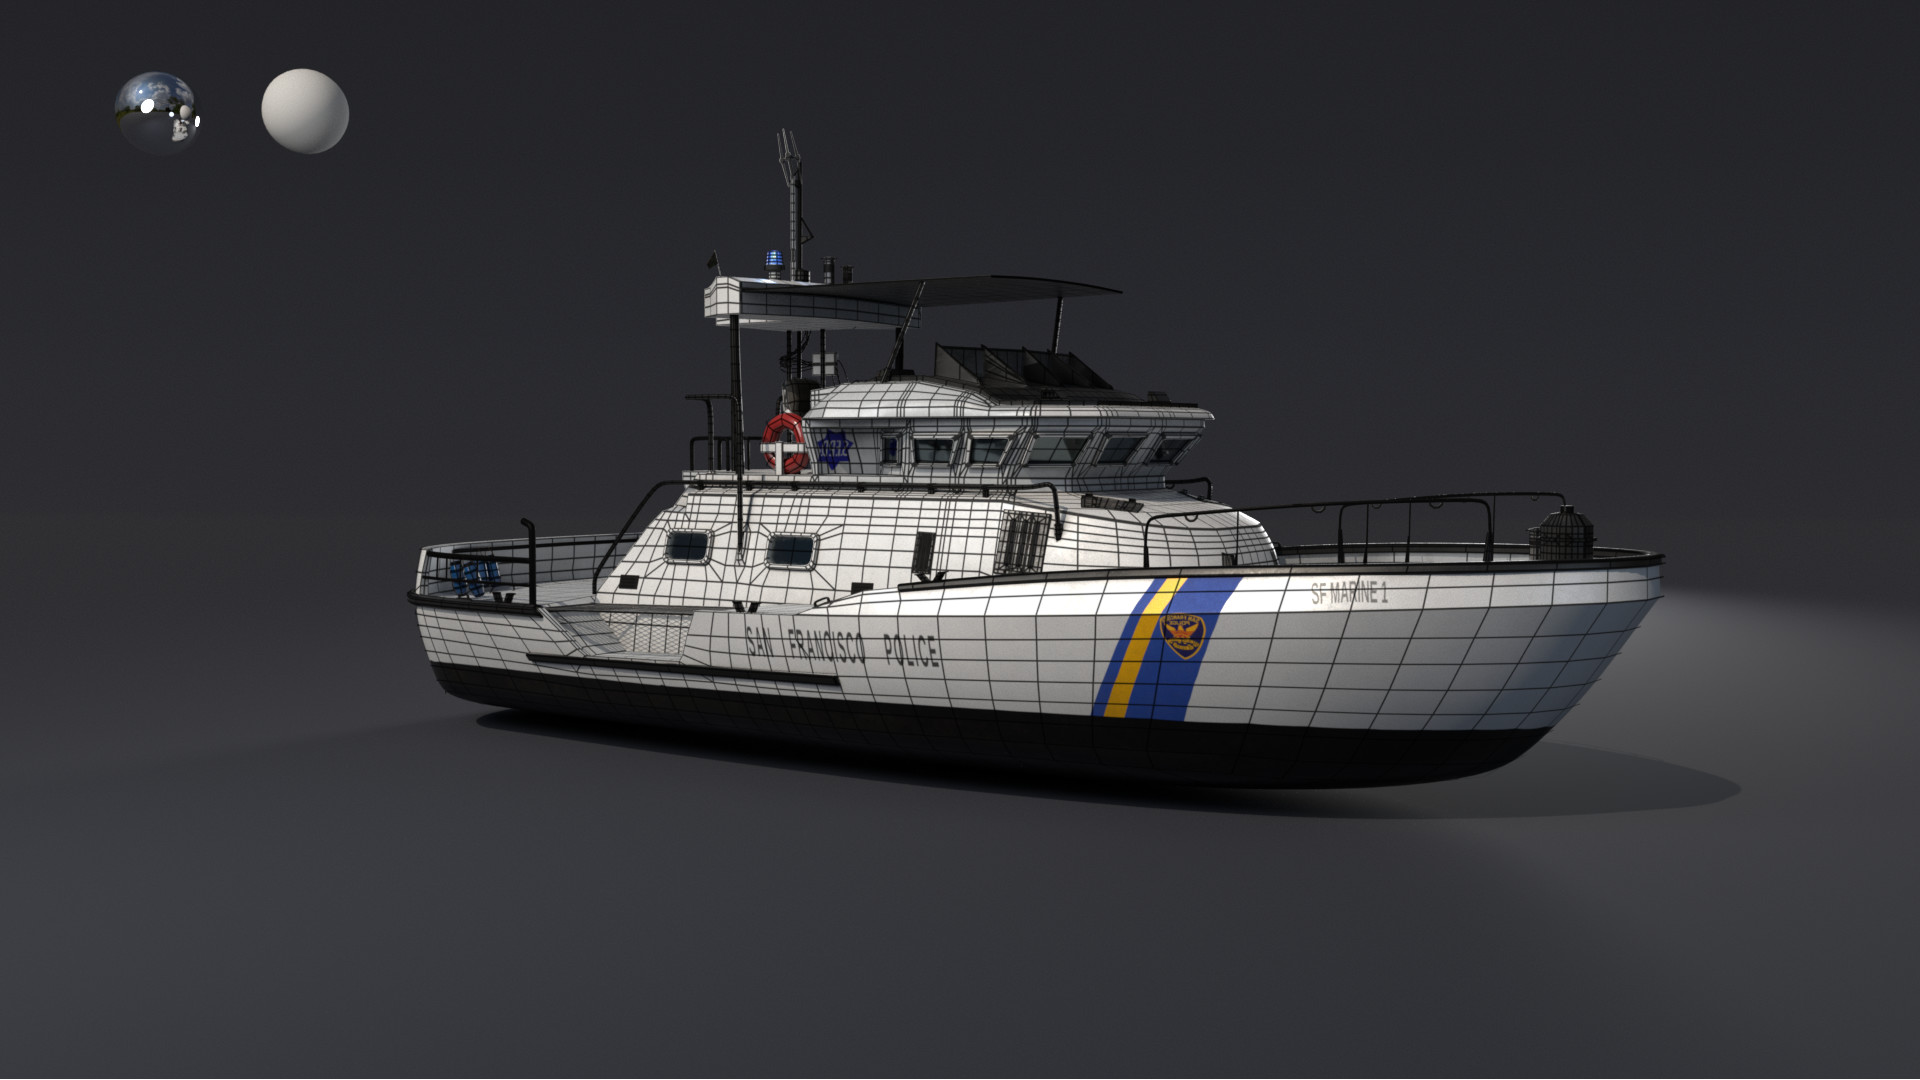 Police Boat Wallpapers